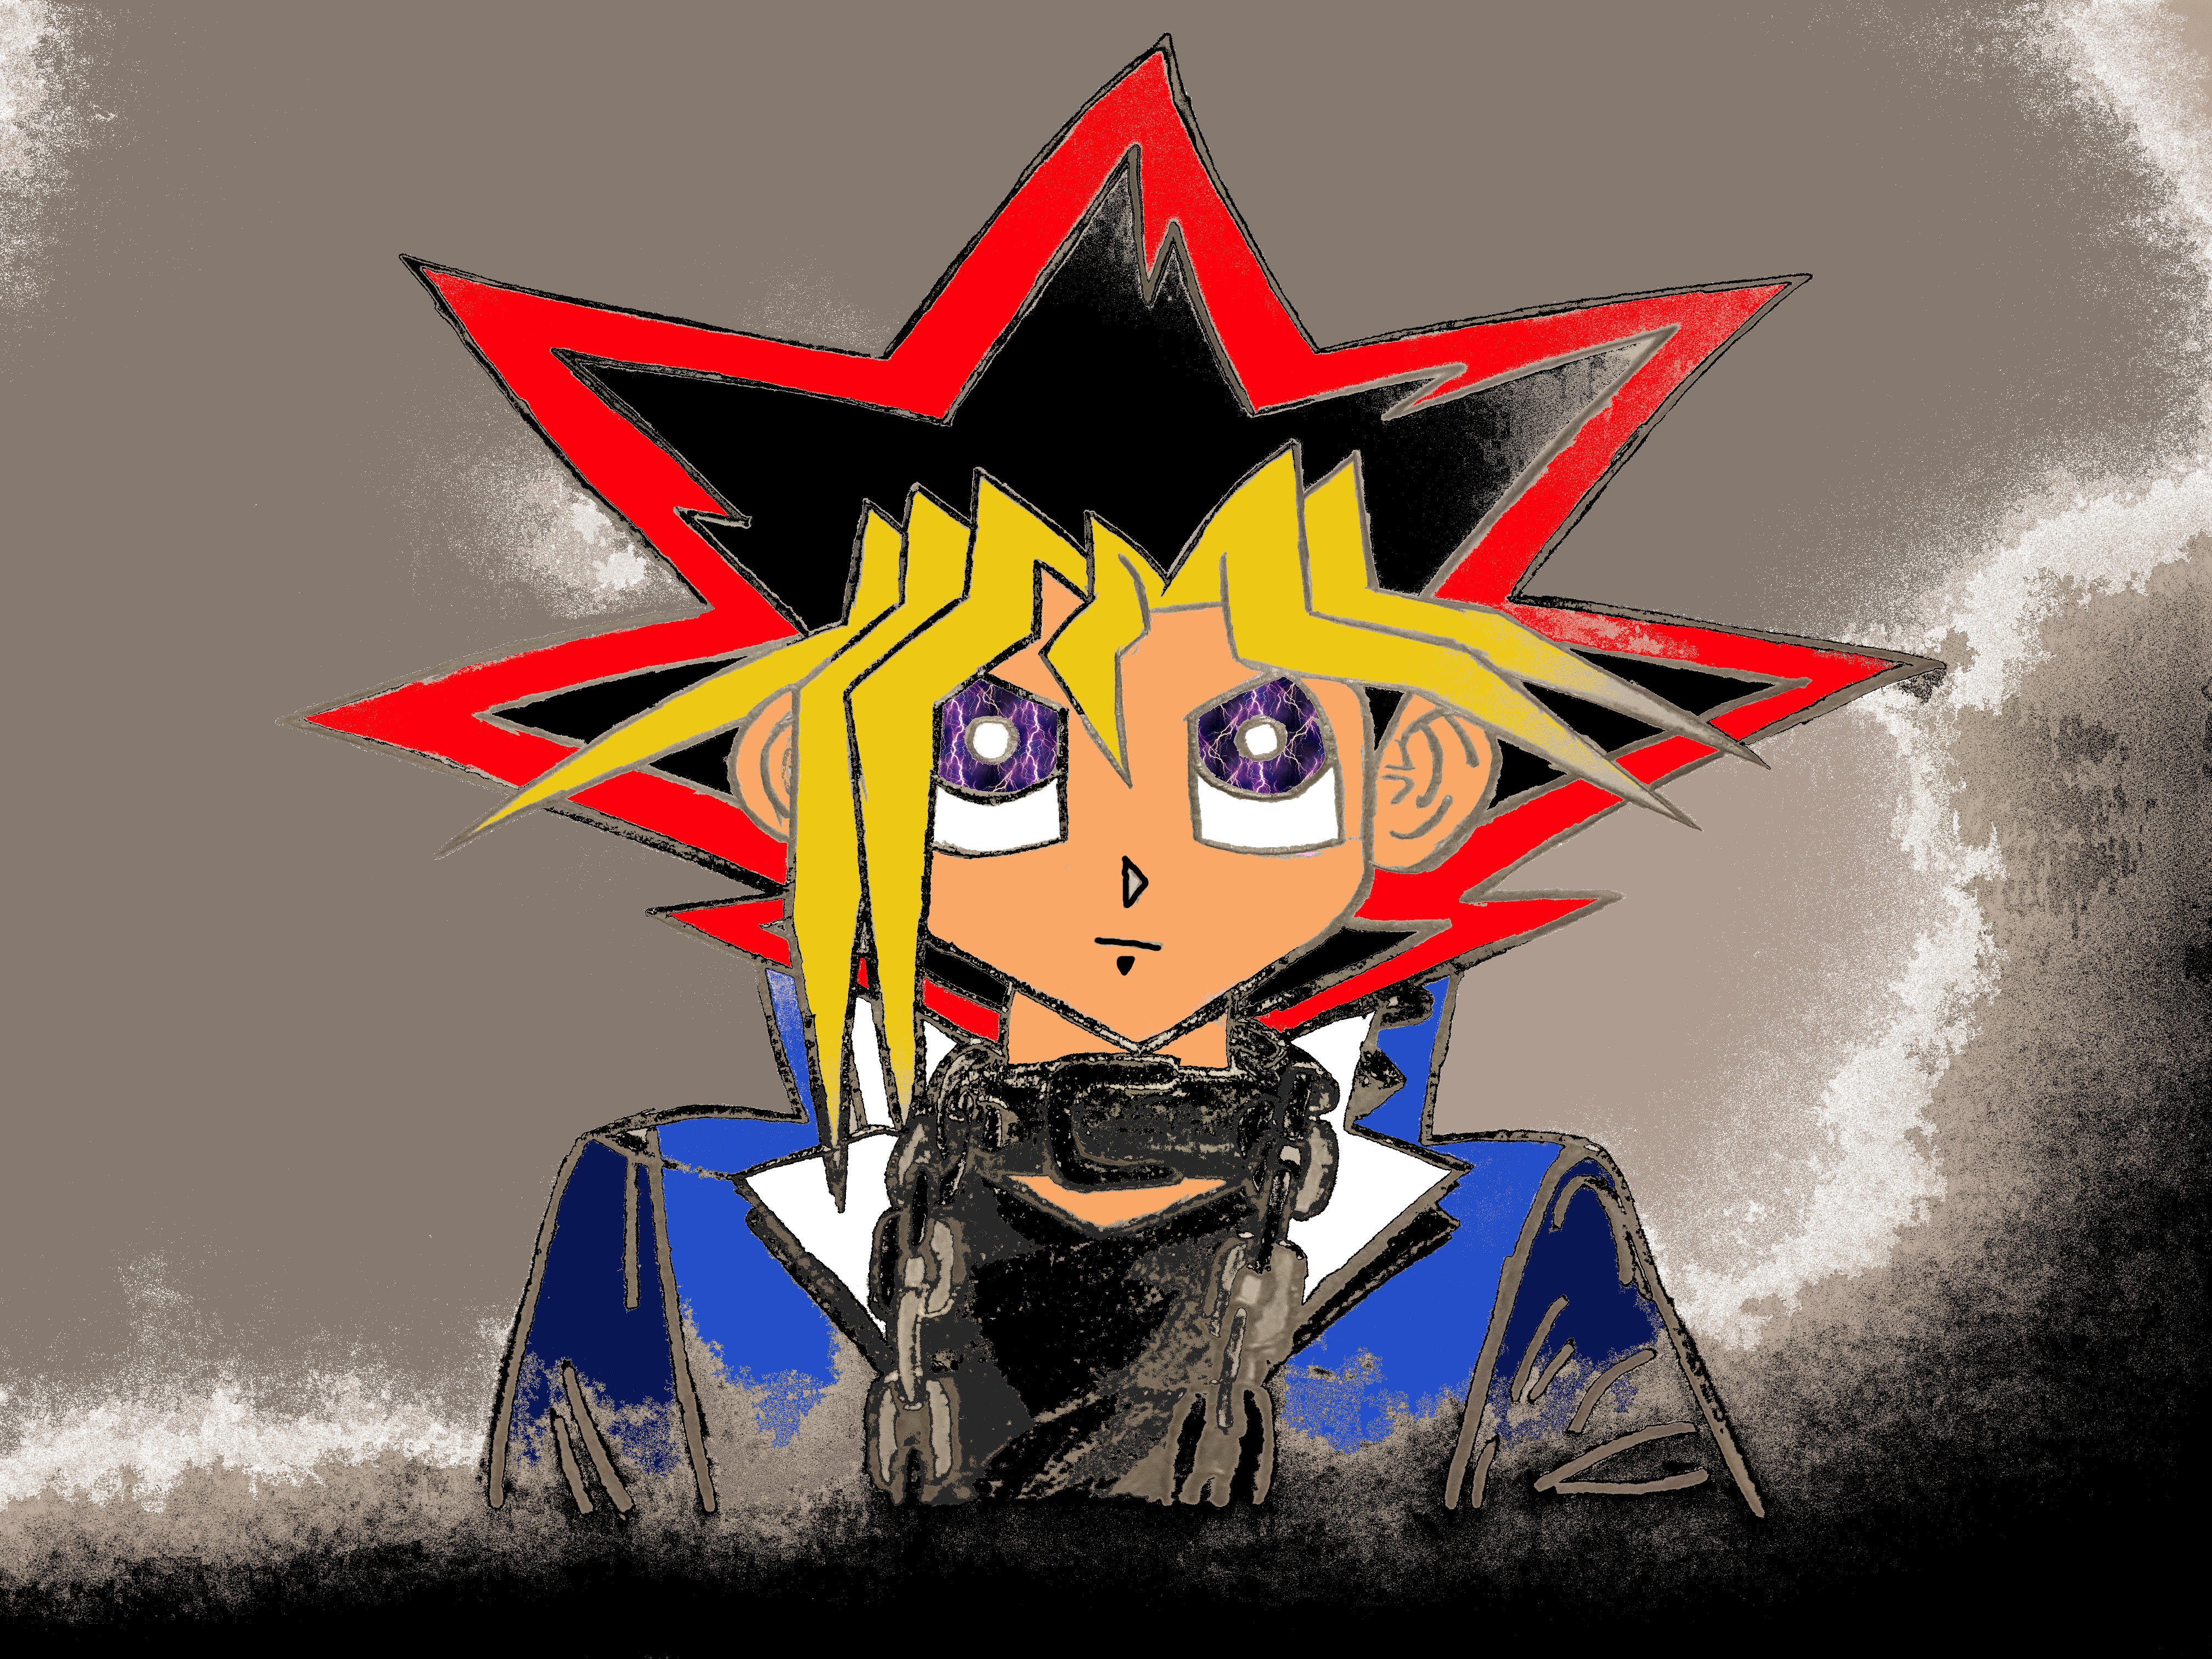 Just a quick doodle of one of my favourite anime characters edited on my PC. - 2021